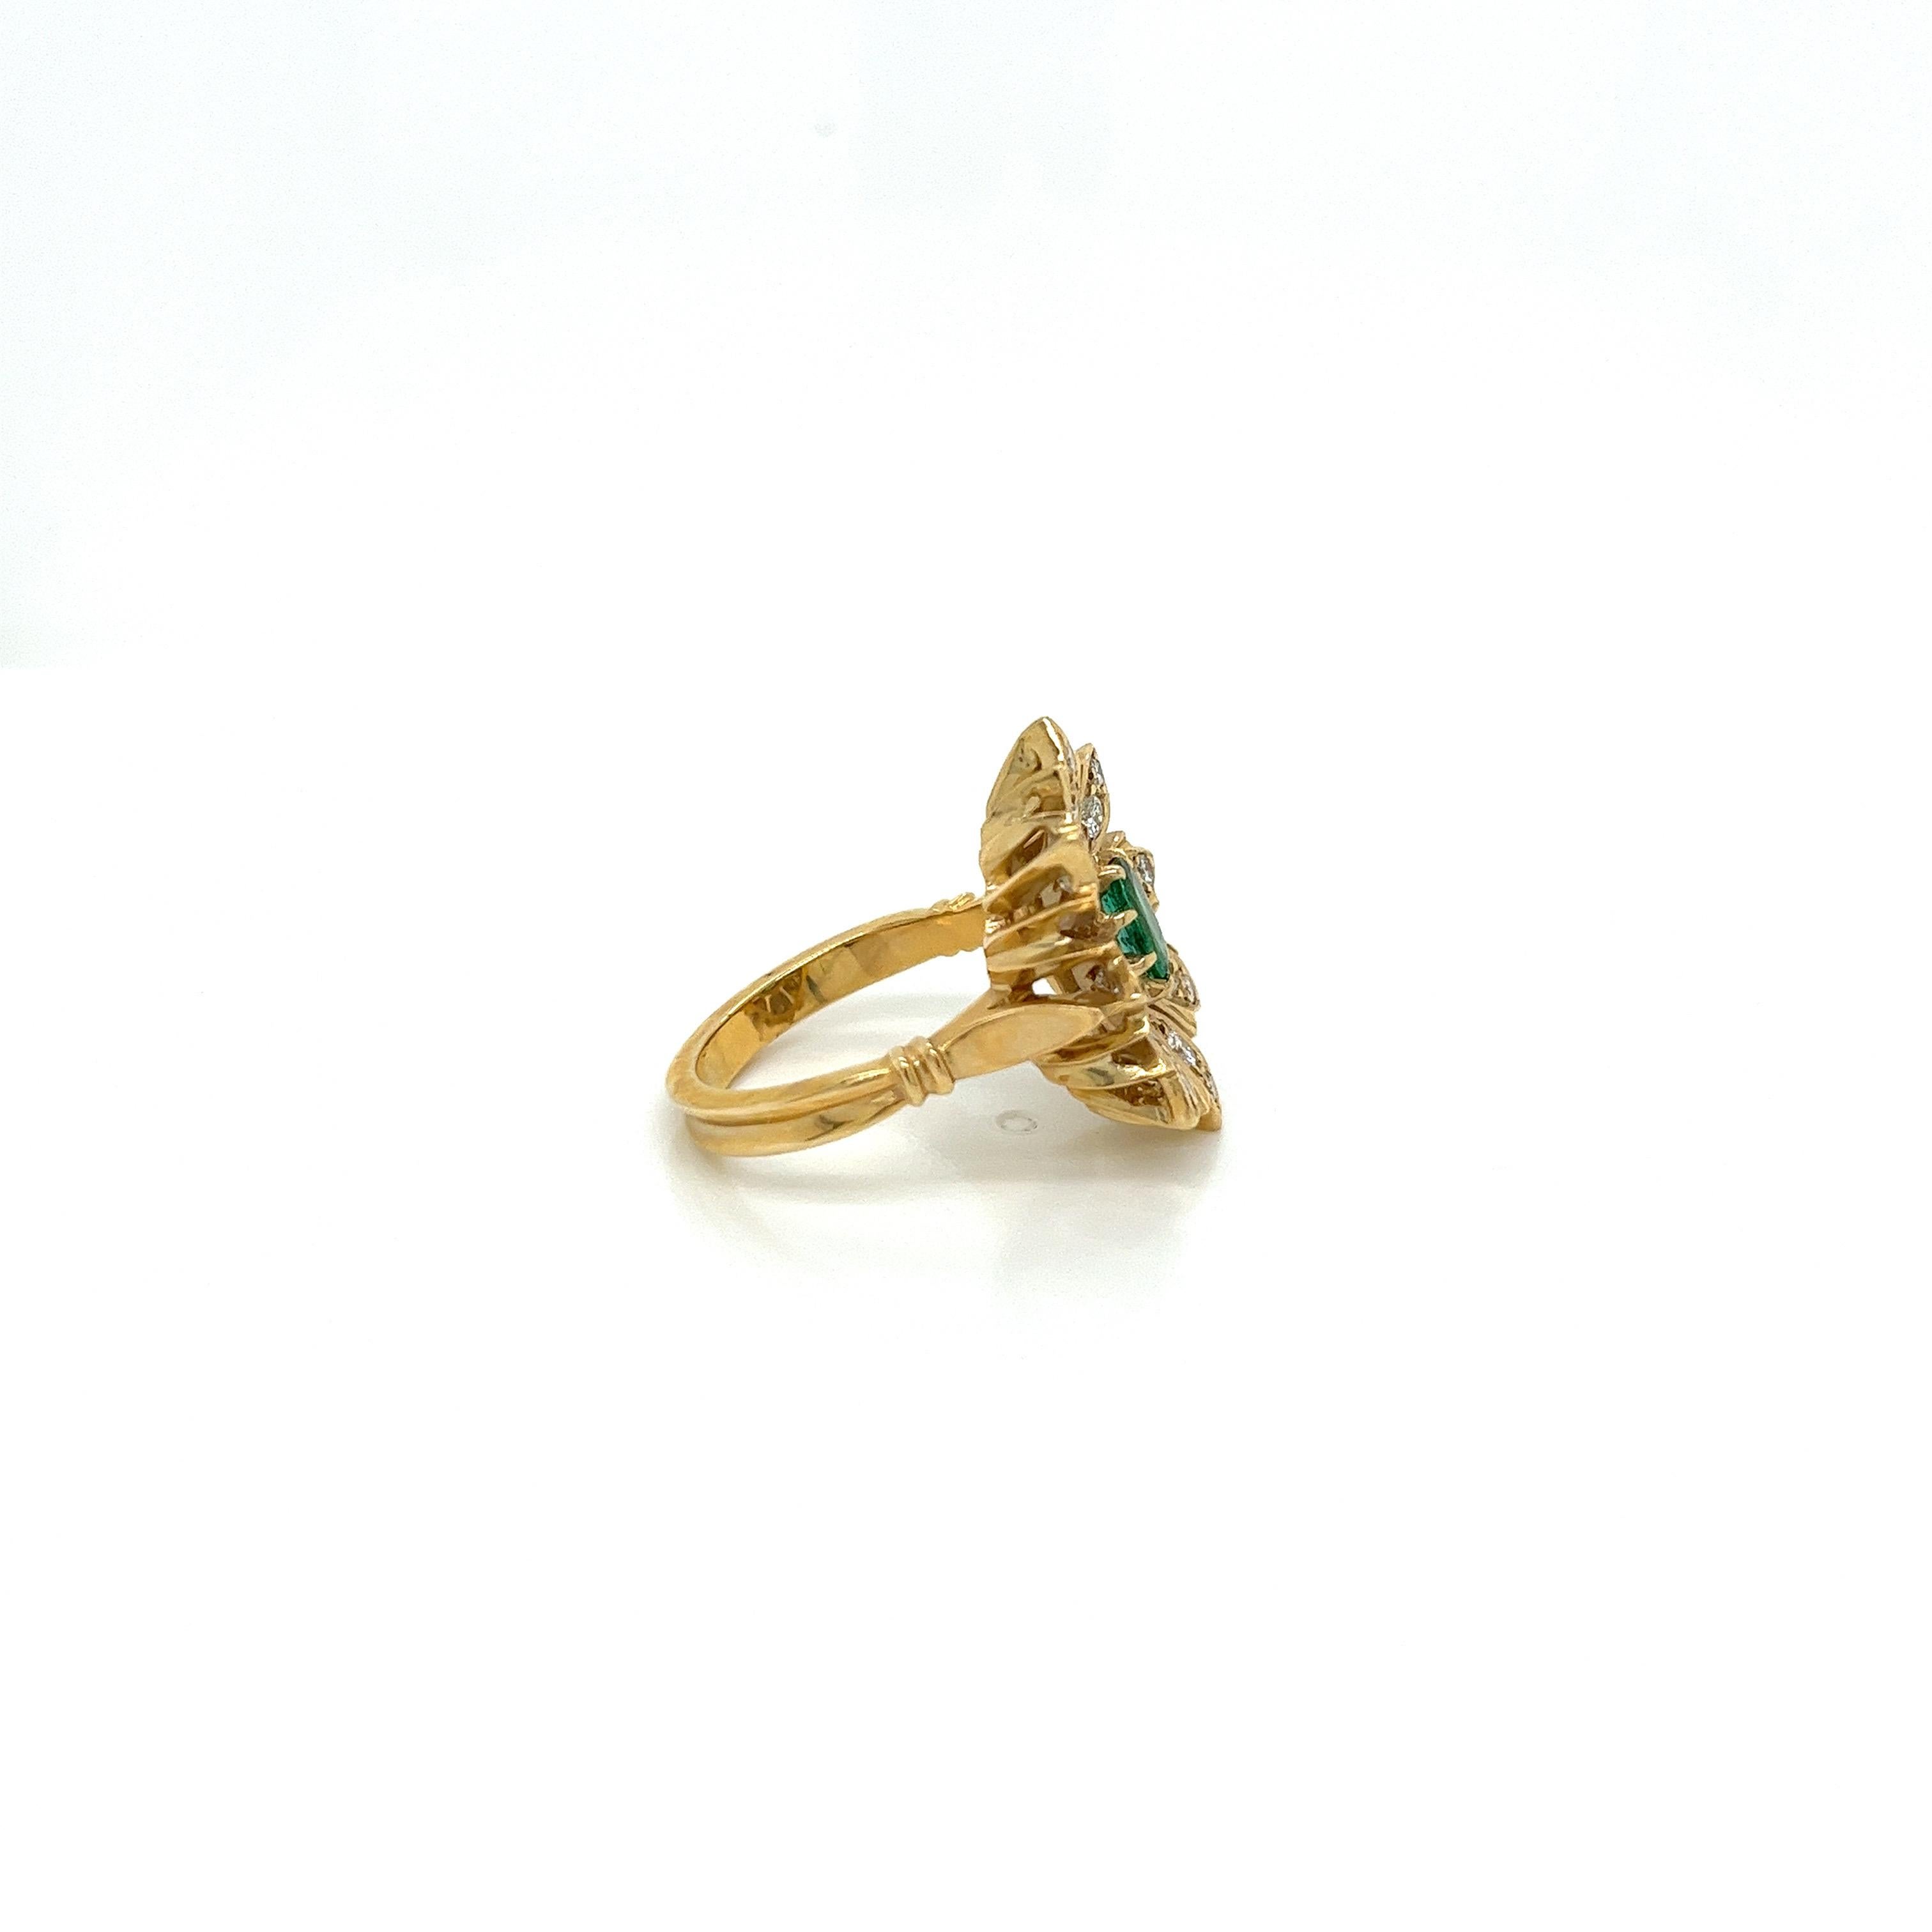 Vintage 14k yellow gold Victorian Reproduction Emerald and Diamond Ring For Sale 2